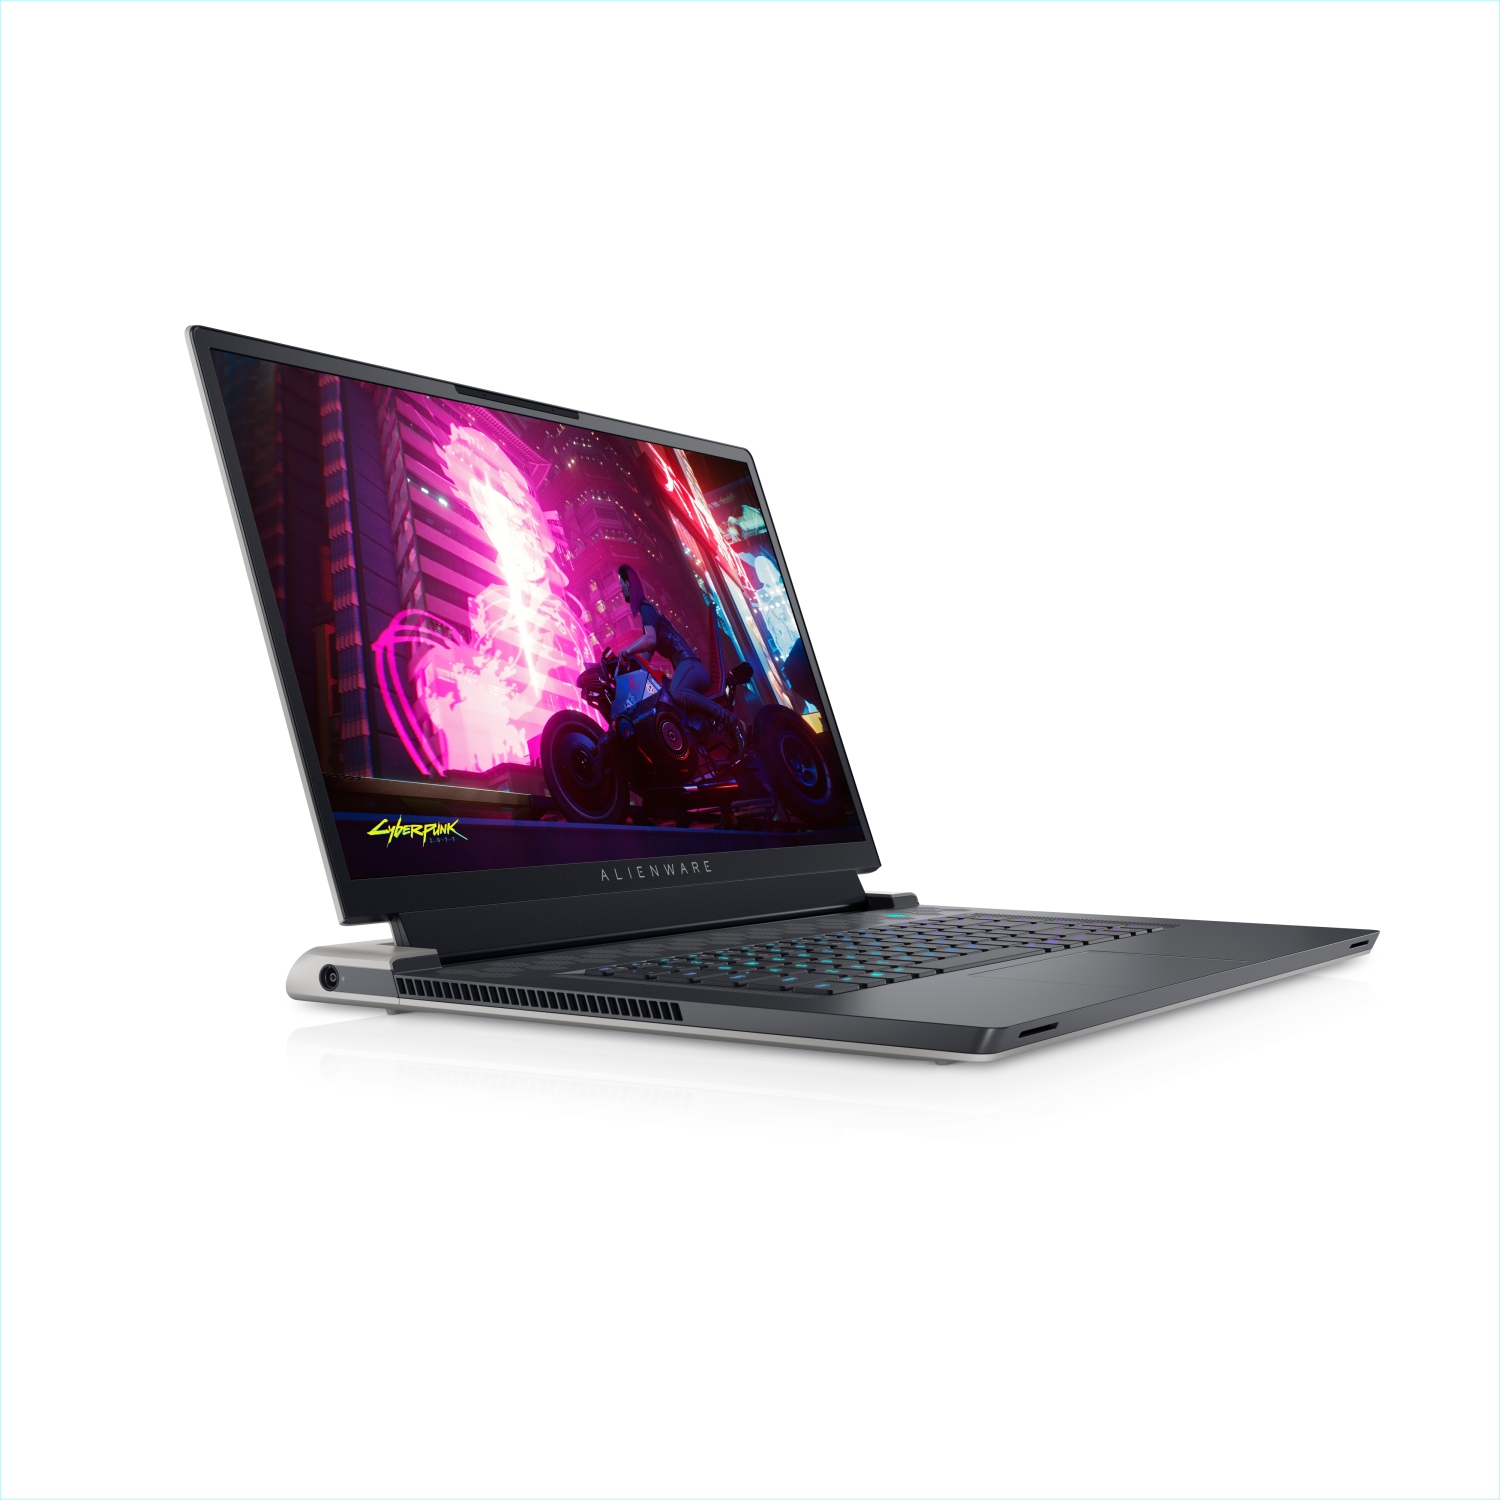 Refurbished (Excellent) - Dell Alienware X17 R1 Gaming Laptop (2021), 17.3" 4K, Core i7, 1TB SSD + 512GB SSD, 16GB RAM, RTX 3070, 4.6 GHz, 11th Gen CPU Certified